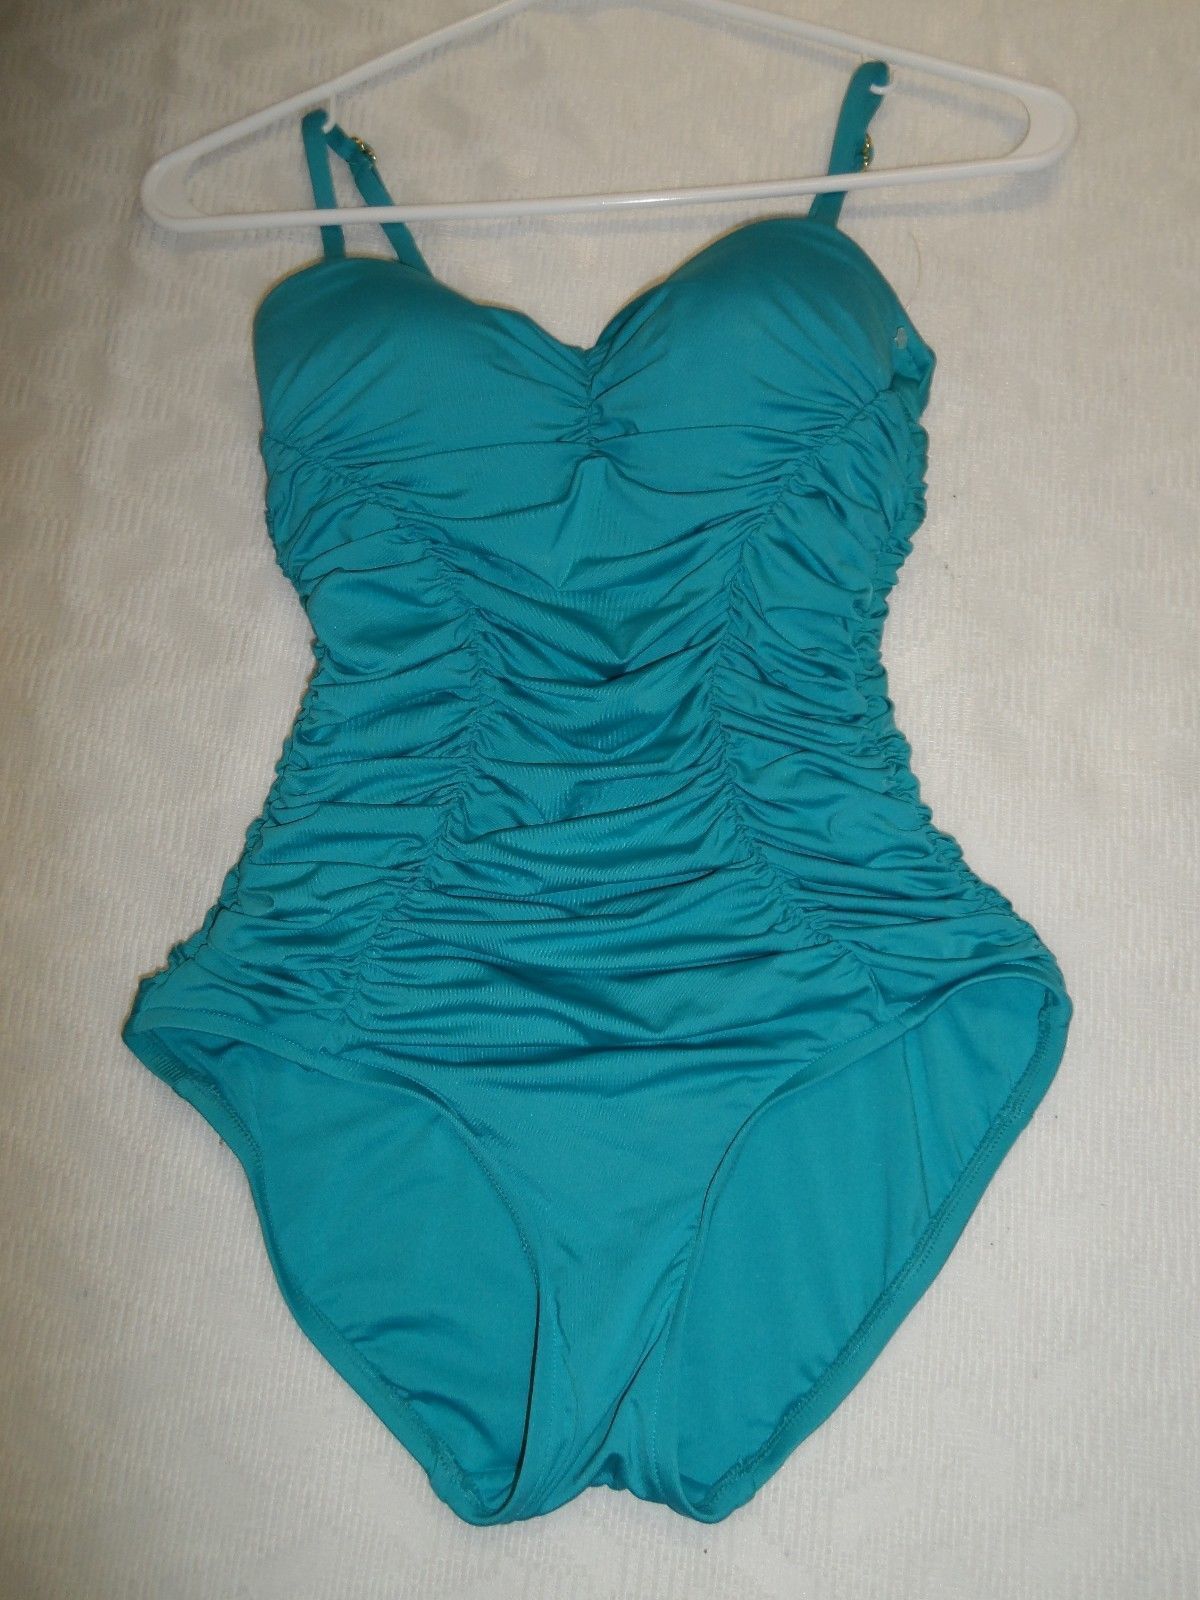 Primary image for Badgley Mischka Shirred Bandeau Maillot One Piece Swimsuit Blue 4 12-$118